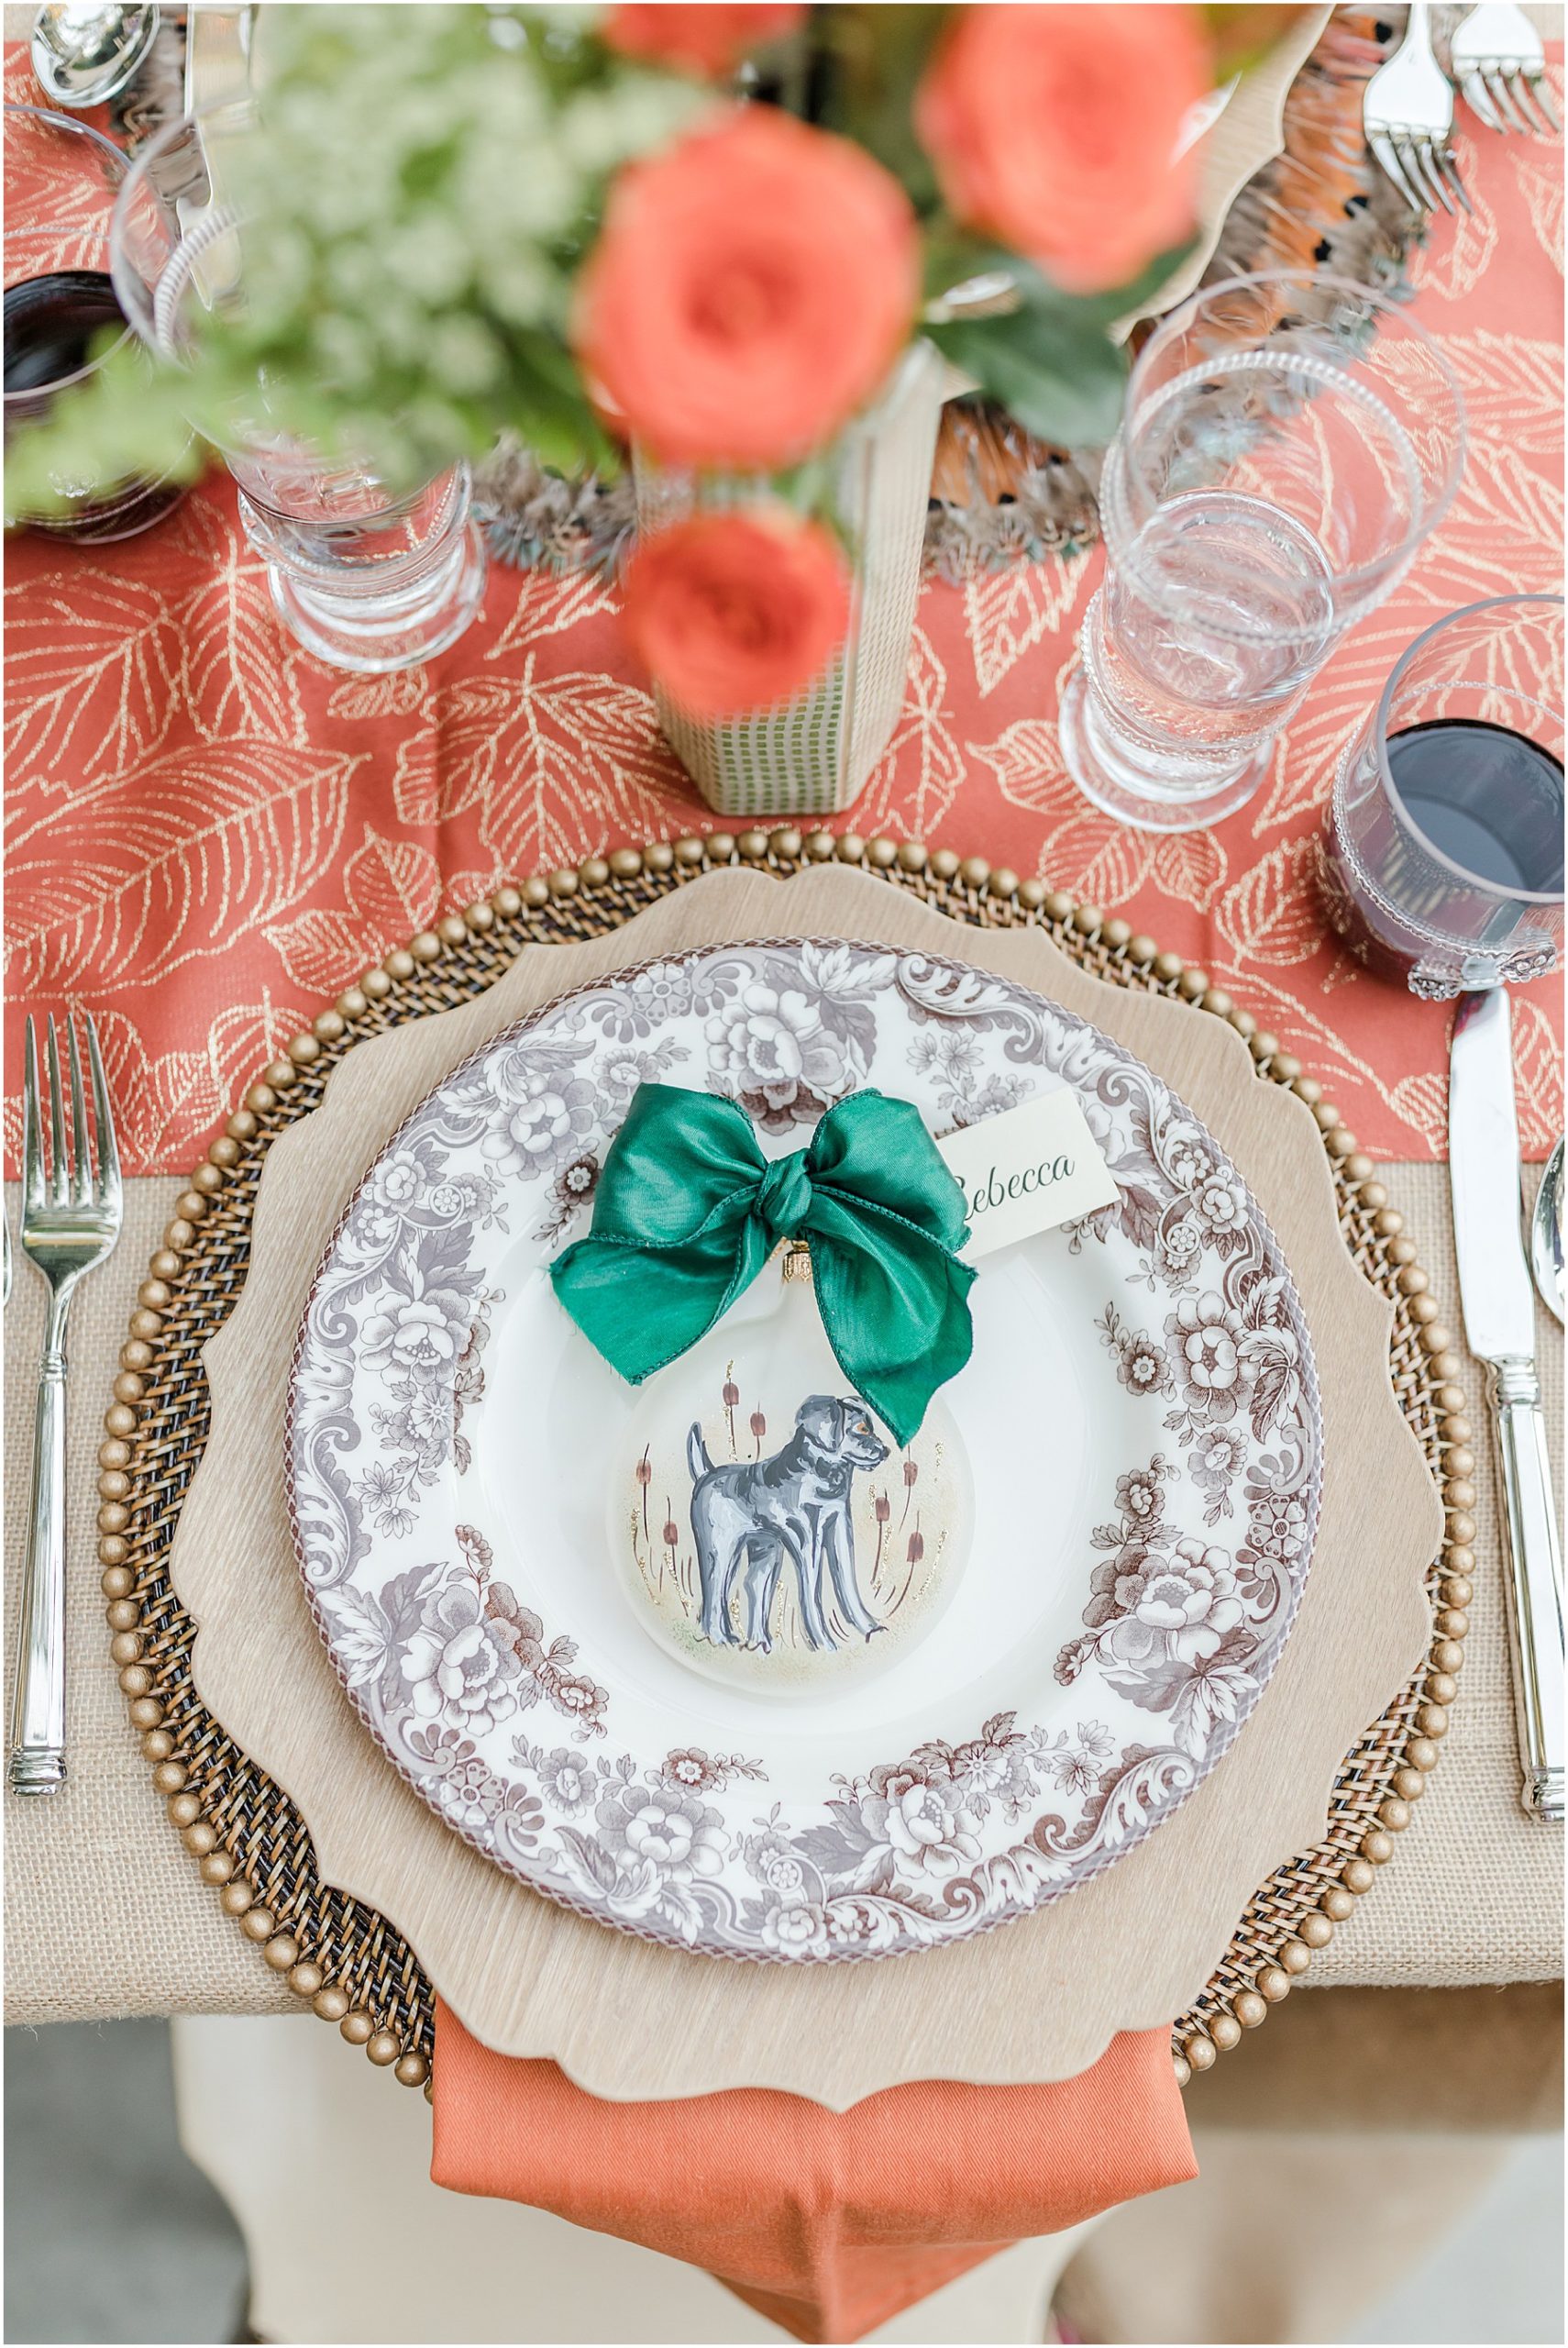 A thanksgiving table place setting featuring a plate with black lab hunting dog.